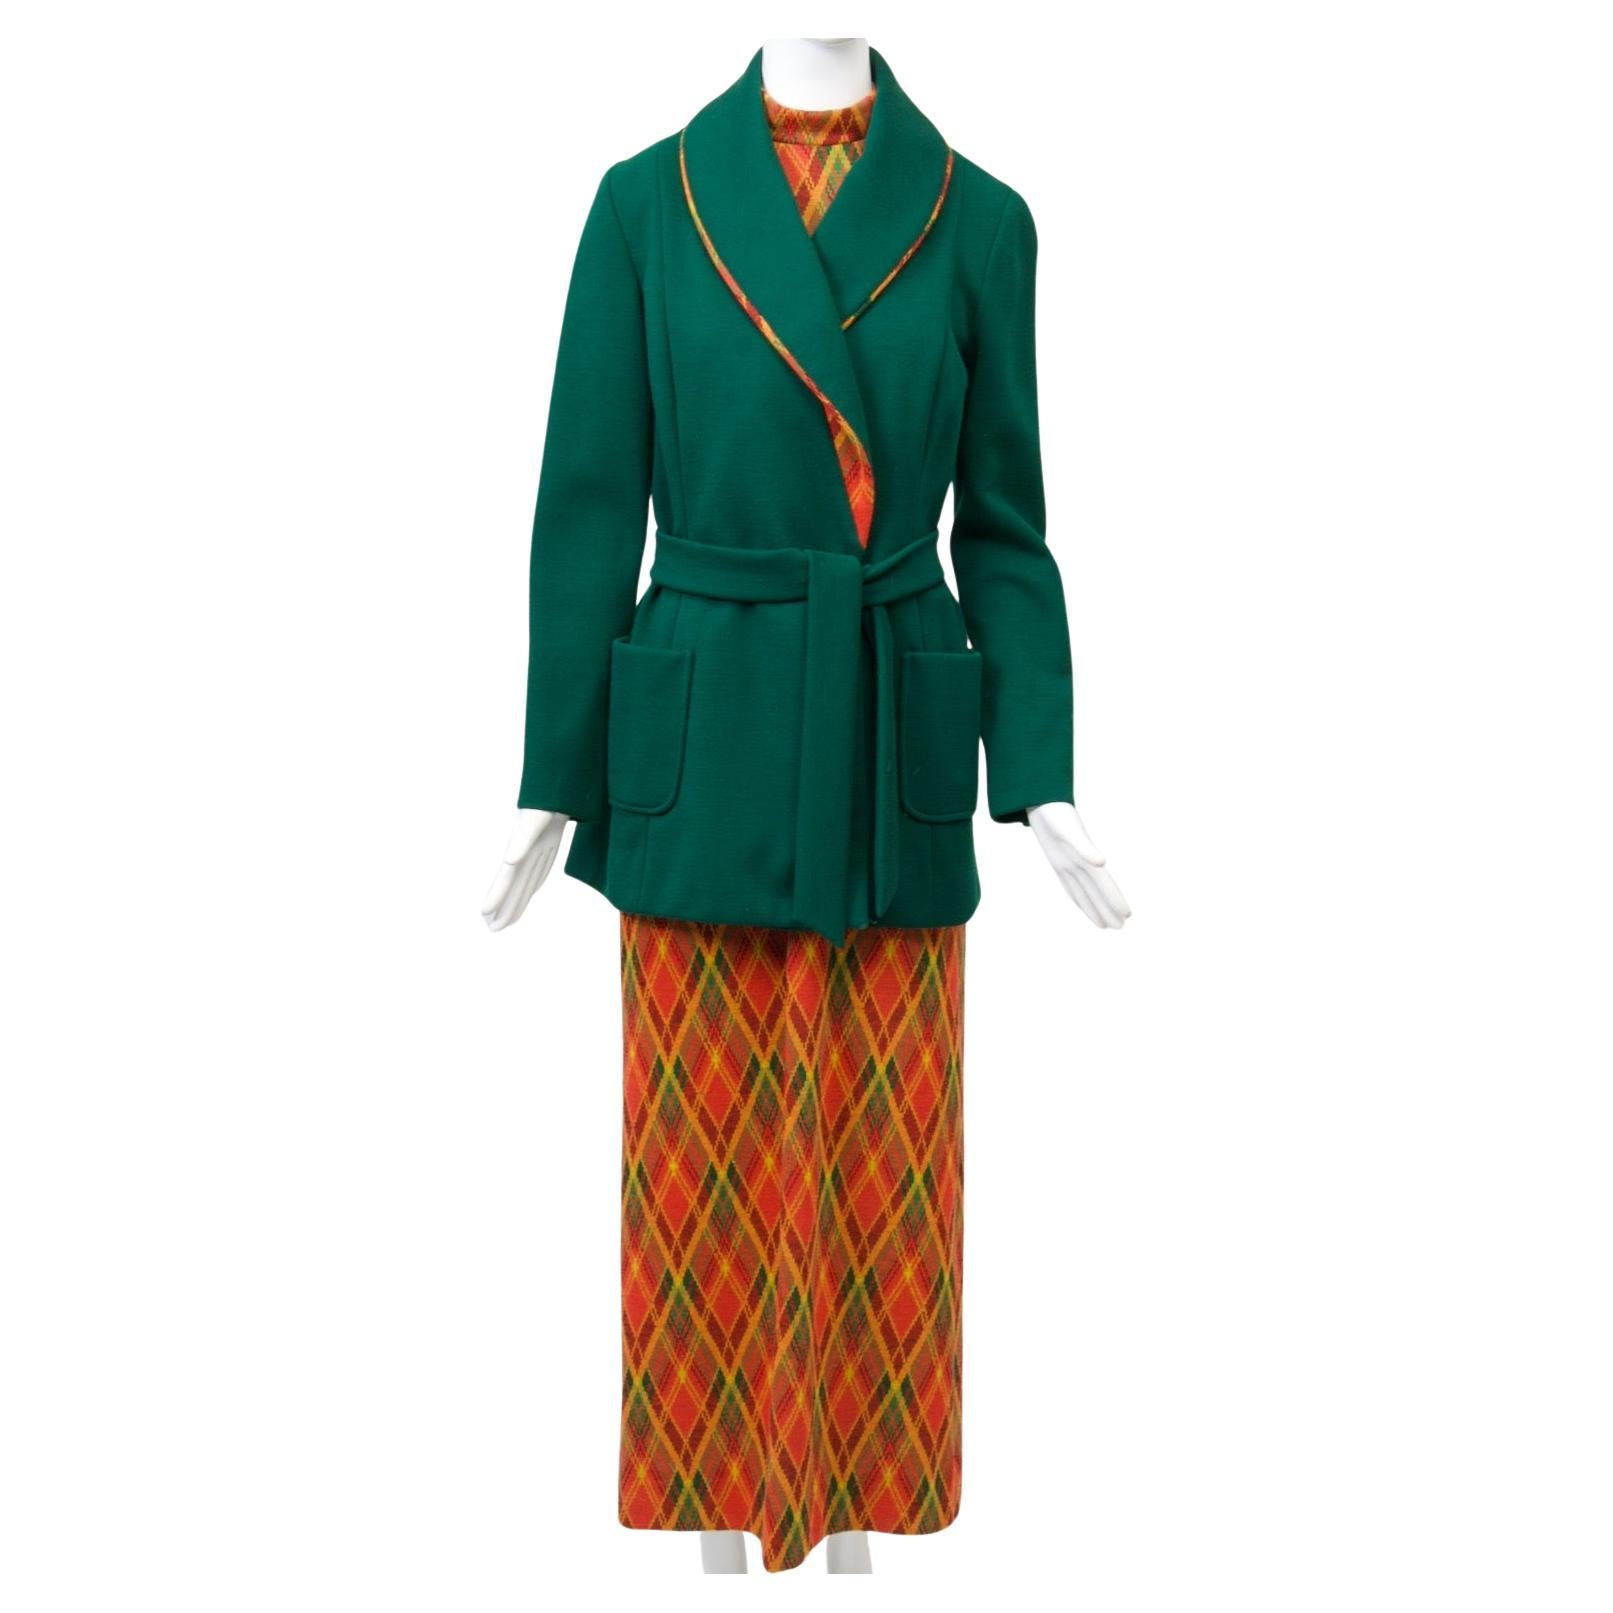 Brenner Couture Plaid Maxi Dress with Green Jacket